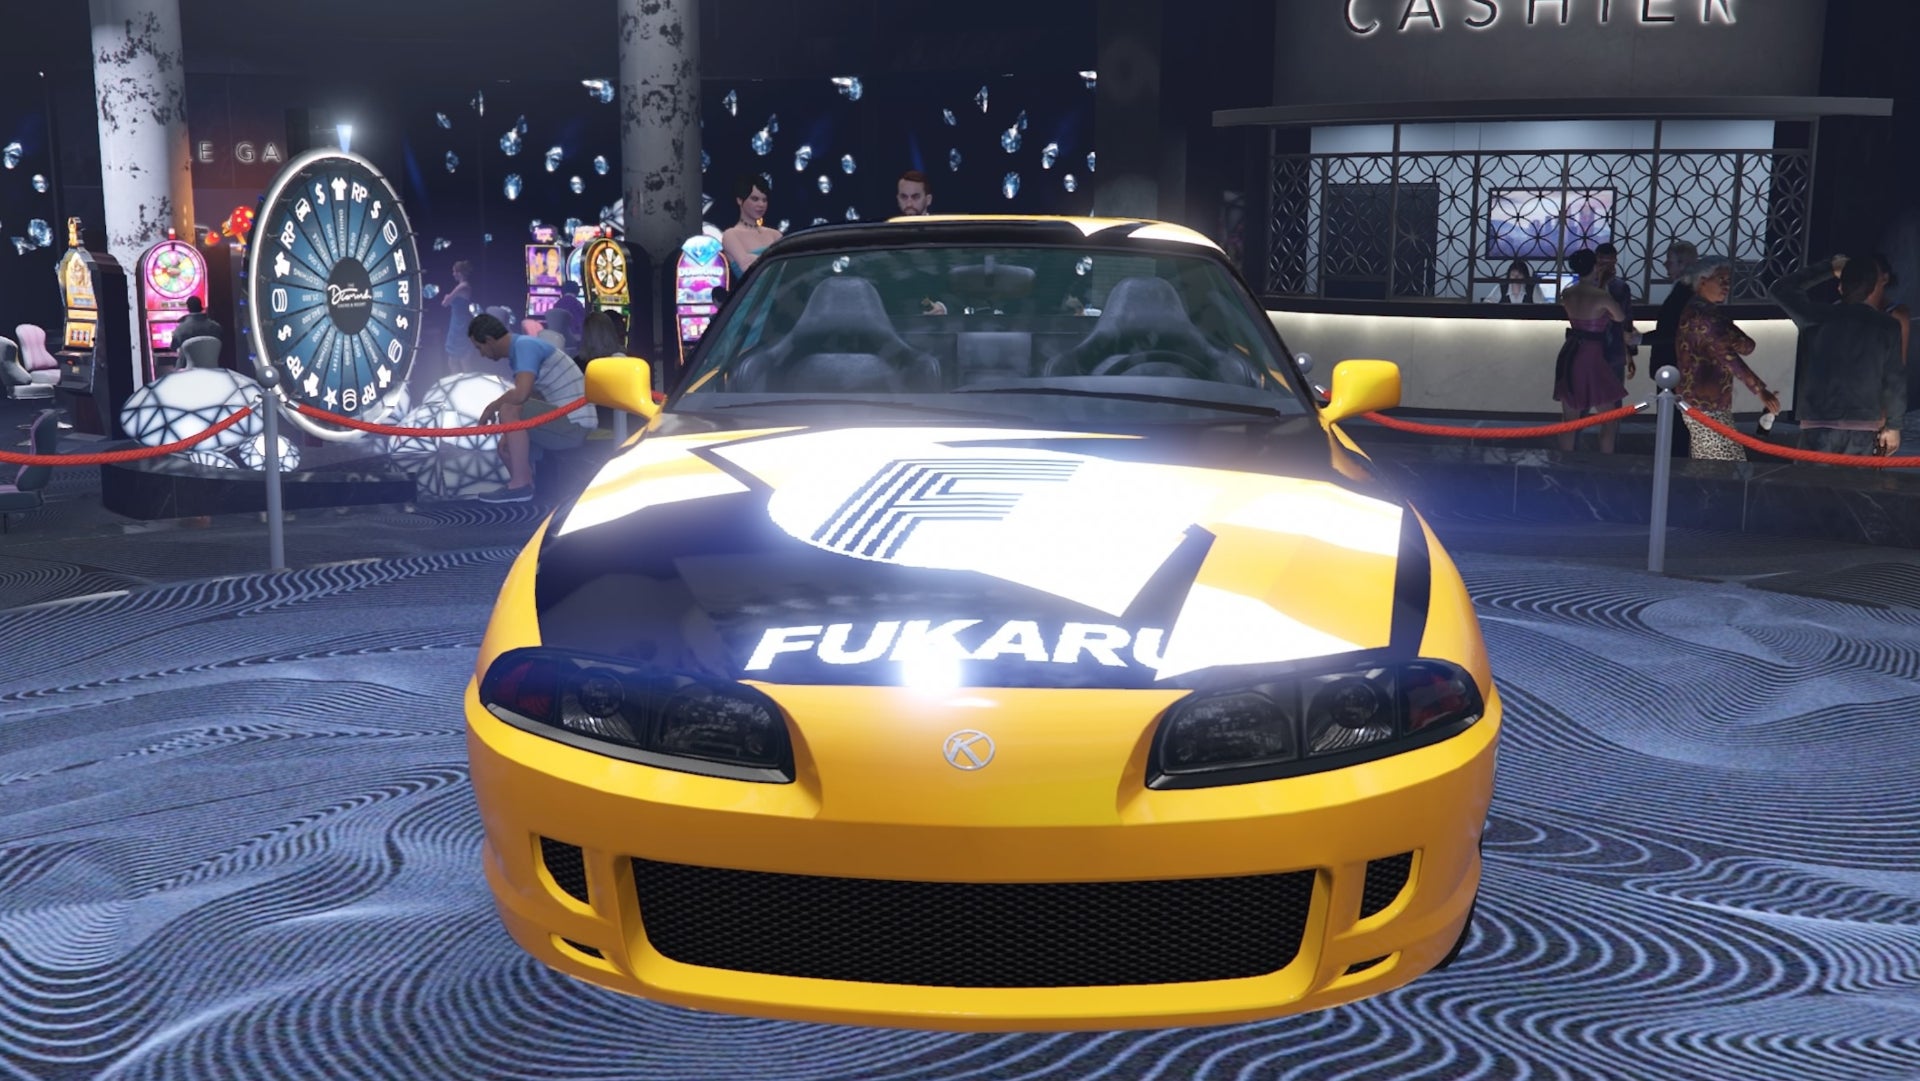 GTA Online, a front view of a yellow Karin Previon on the podium in the Diamond Casino